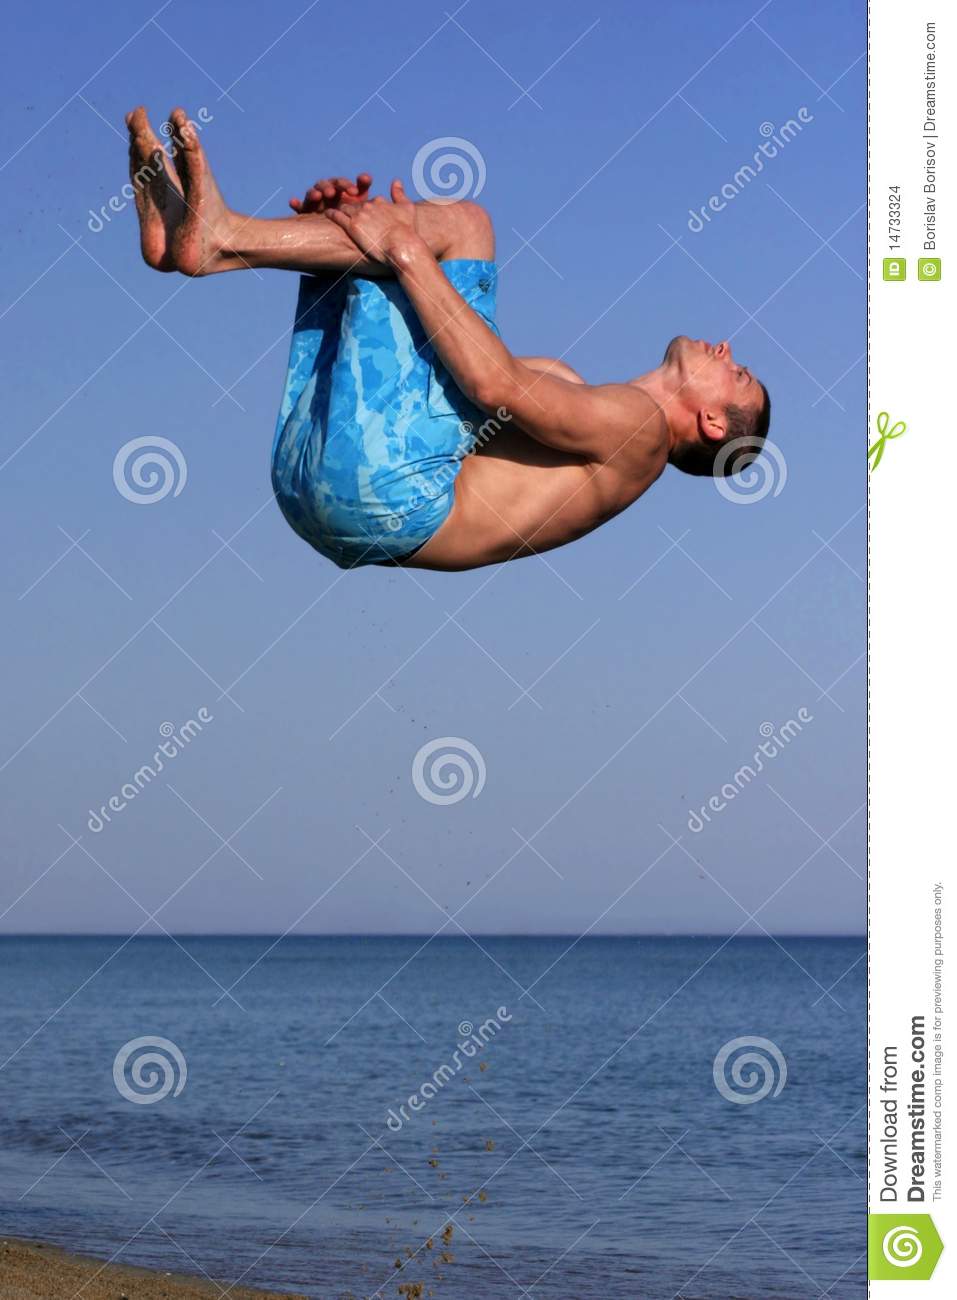 Athletic Man Makes Somersault On The Beach